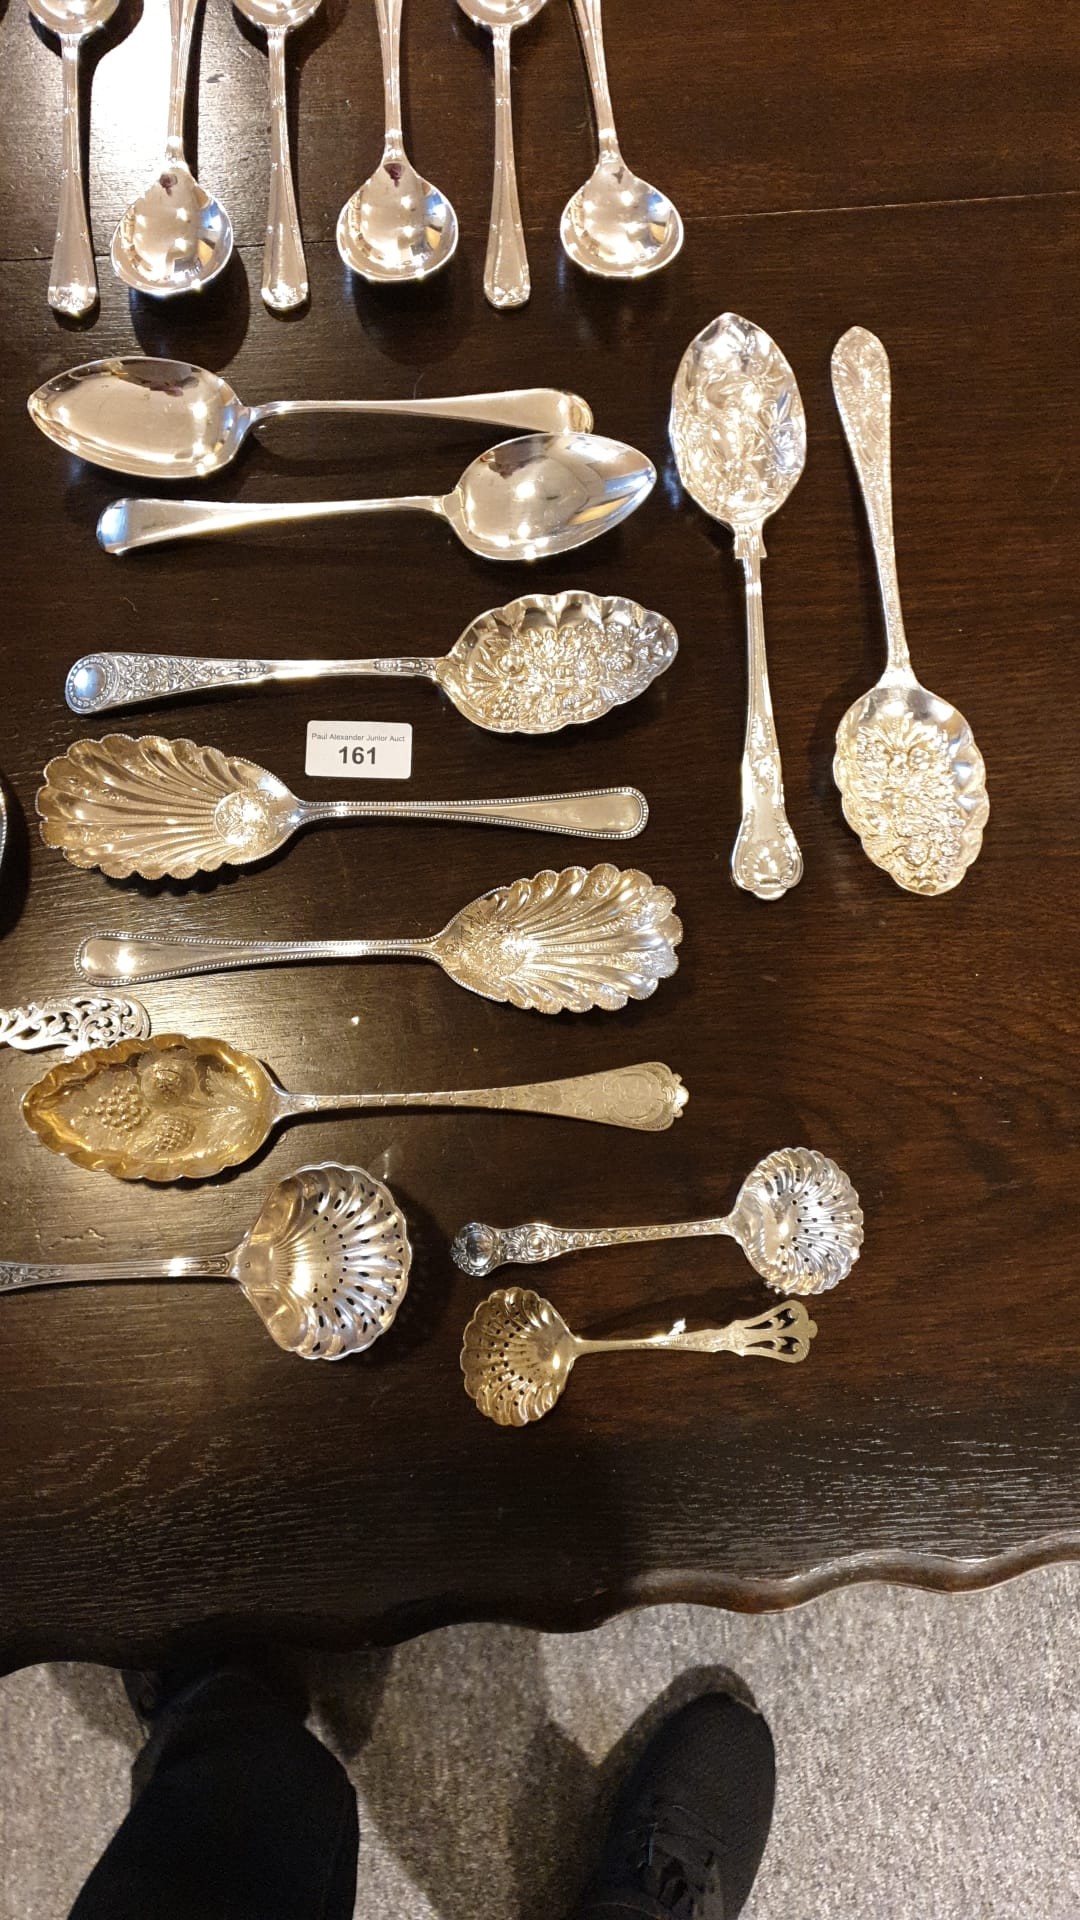 Large selection Berry Spoons Serving spoons Sifting ladles ect . - Image 3 of 5